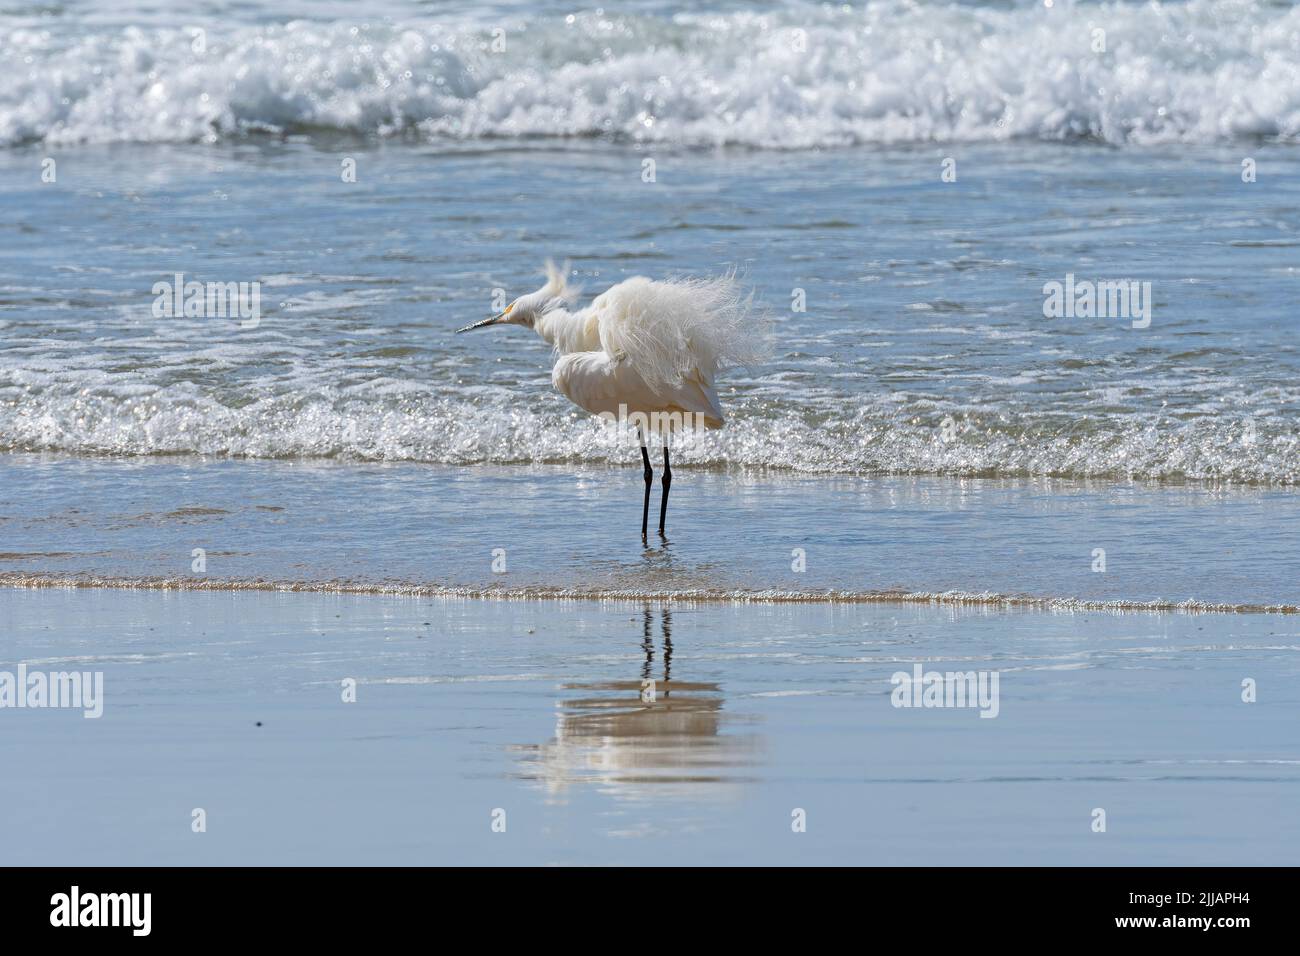 Snowy Egret Fluffing Its Feathers Amidst Crashing Waves by La Jolla, California Stock Photo